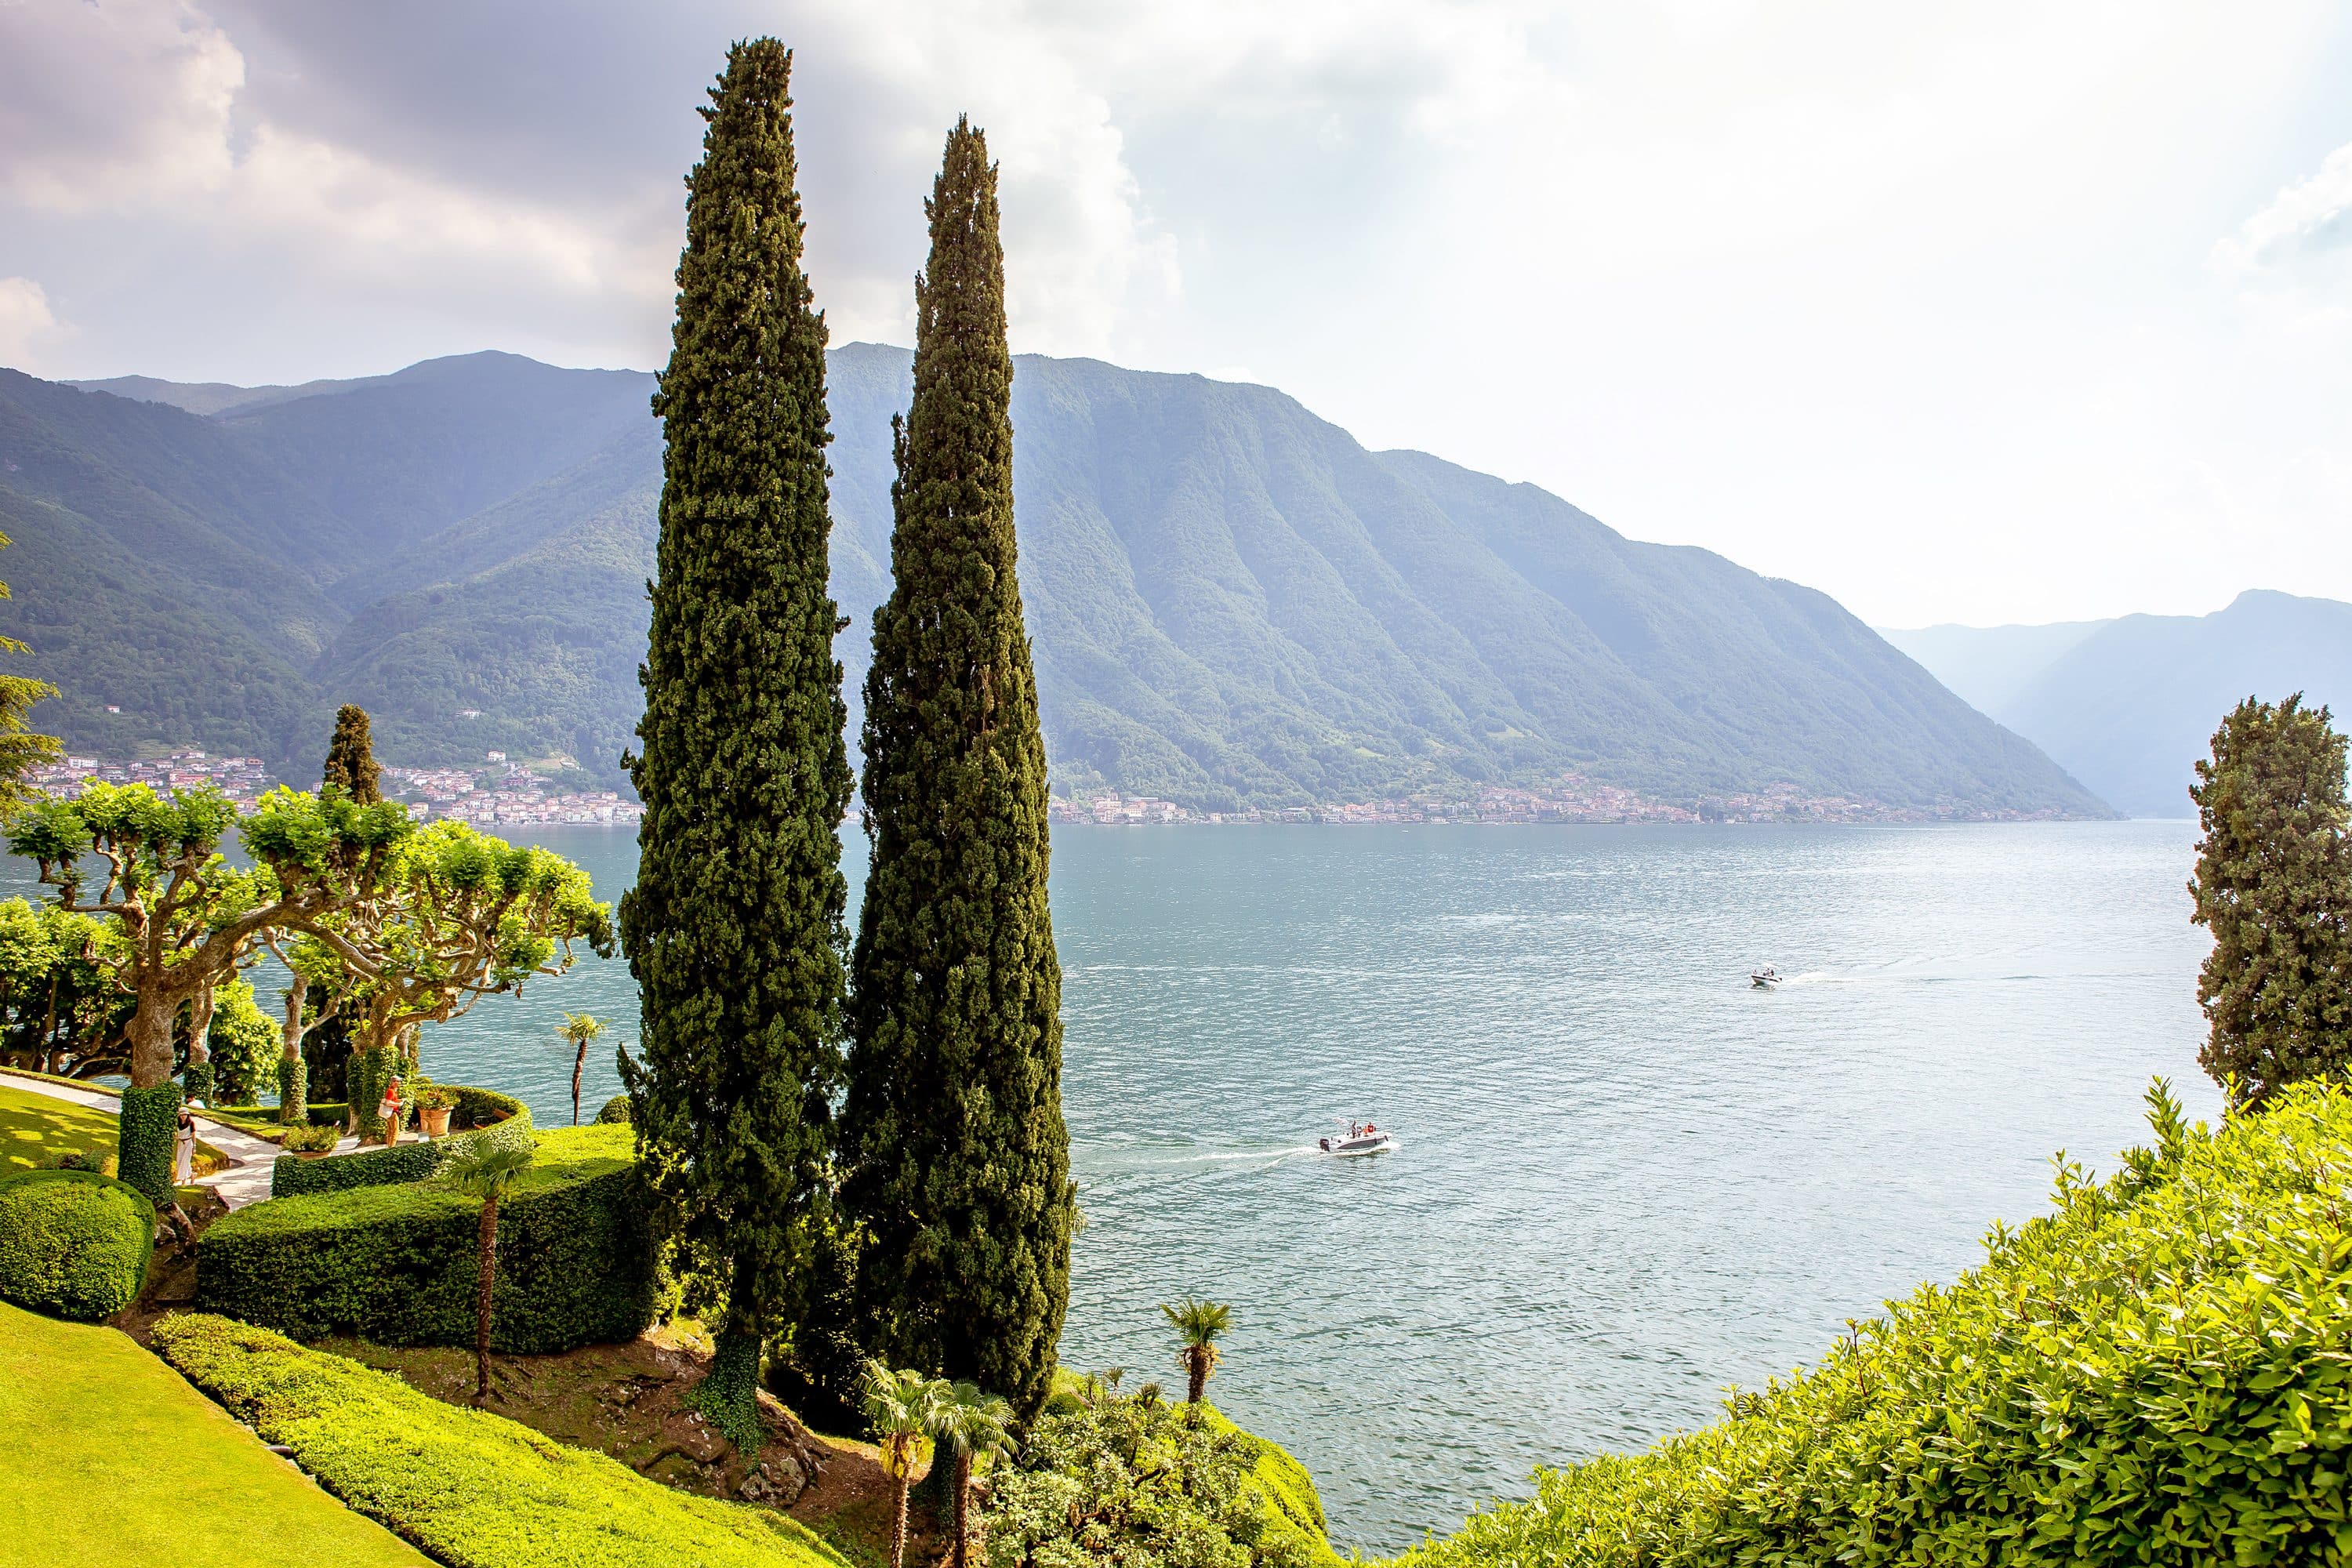 Verdant gardens and trees line the waters edge at Bellagio, Lake Como